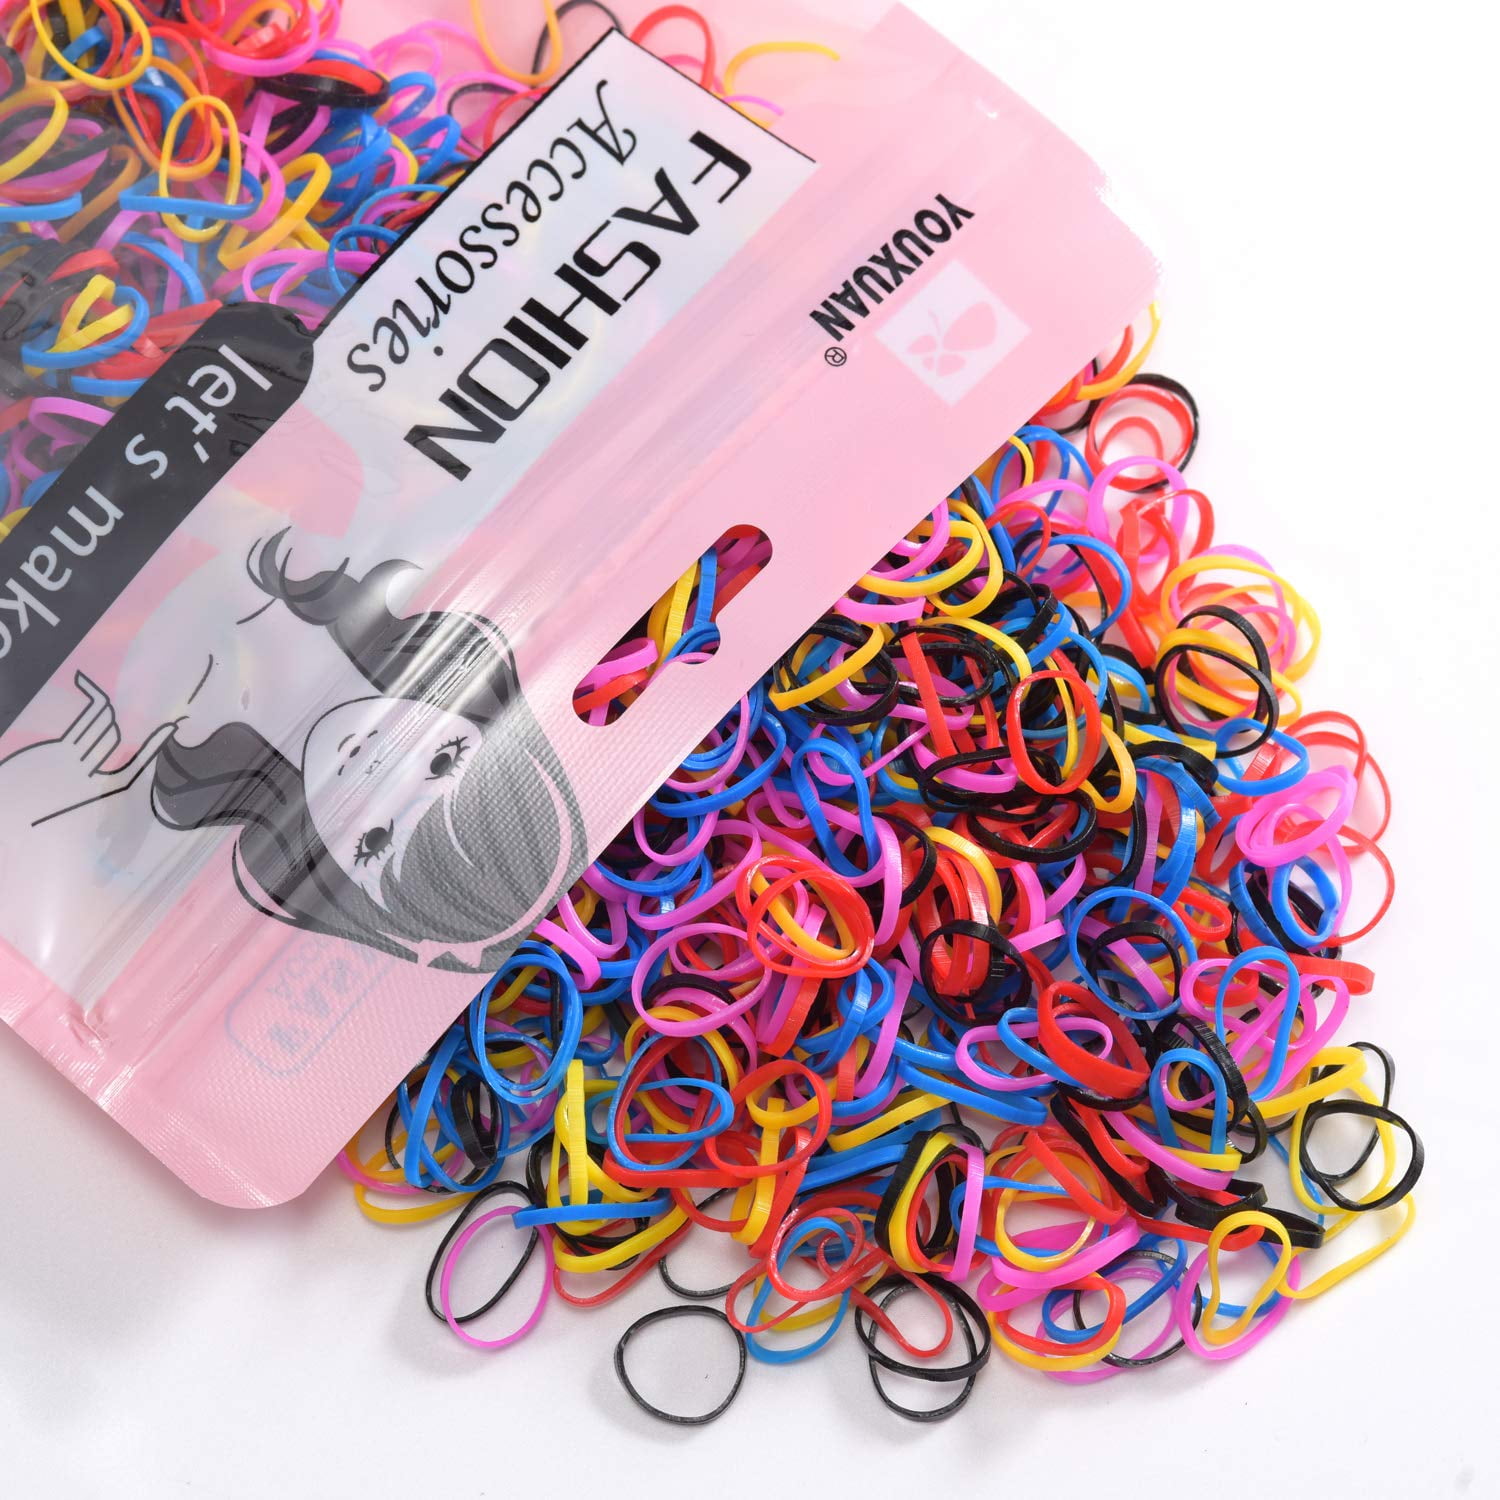 Youxuan Kids Elastics No Damage Colored Hair Bands Fashion Girls Hair Ties  1000 Count Small Size 